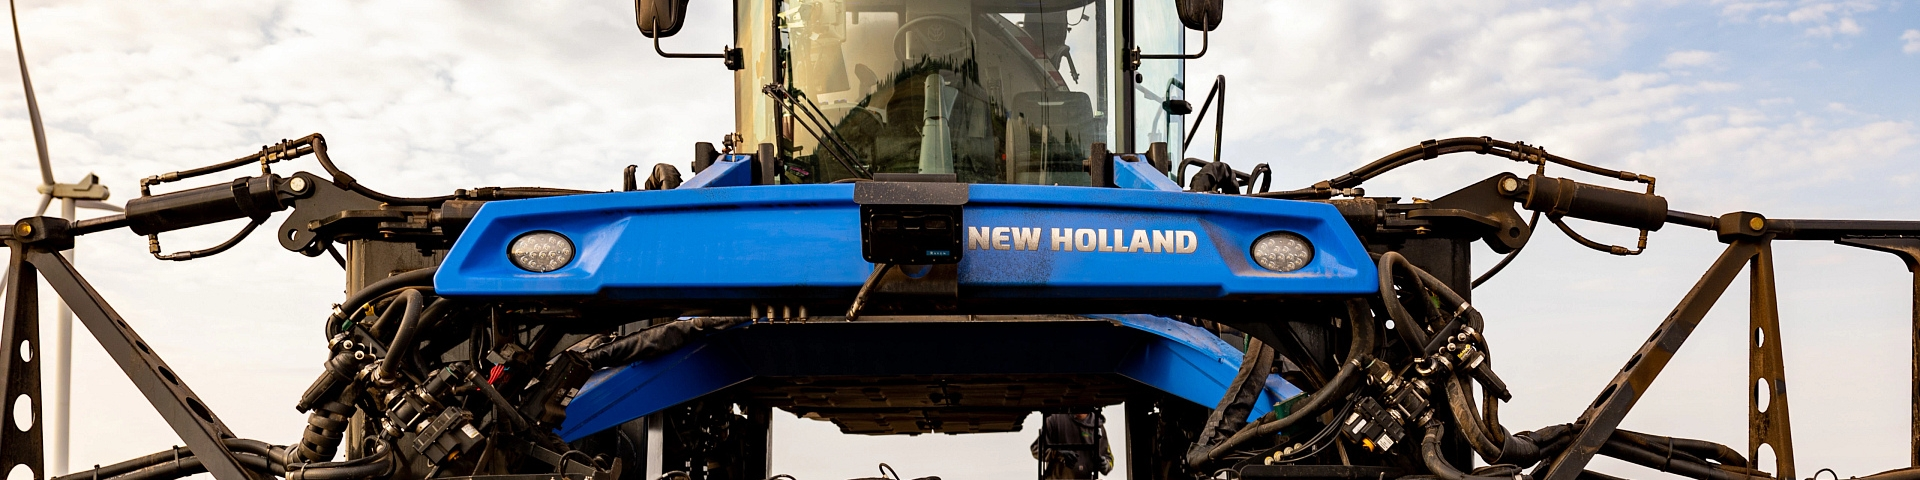 New Holland MyPLM Connect Privacy